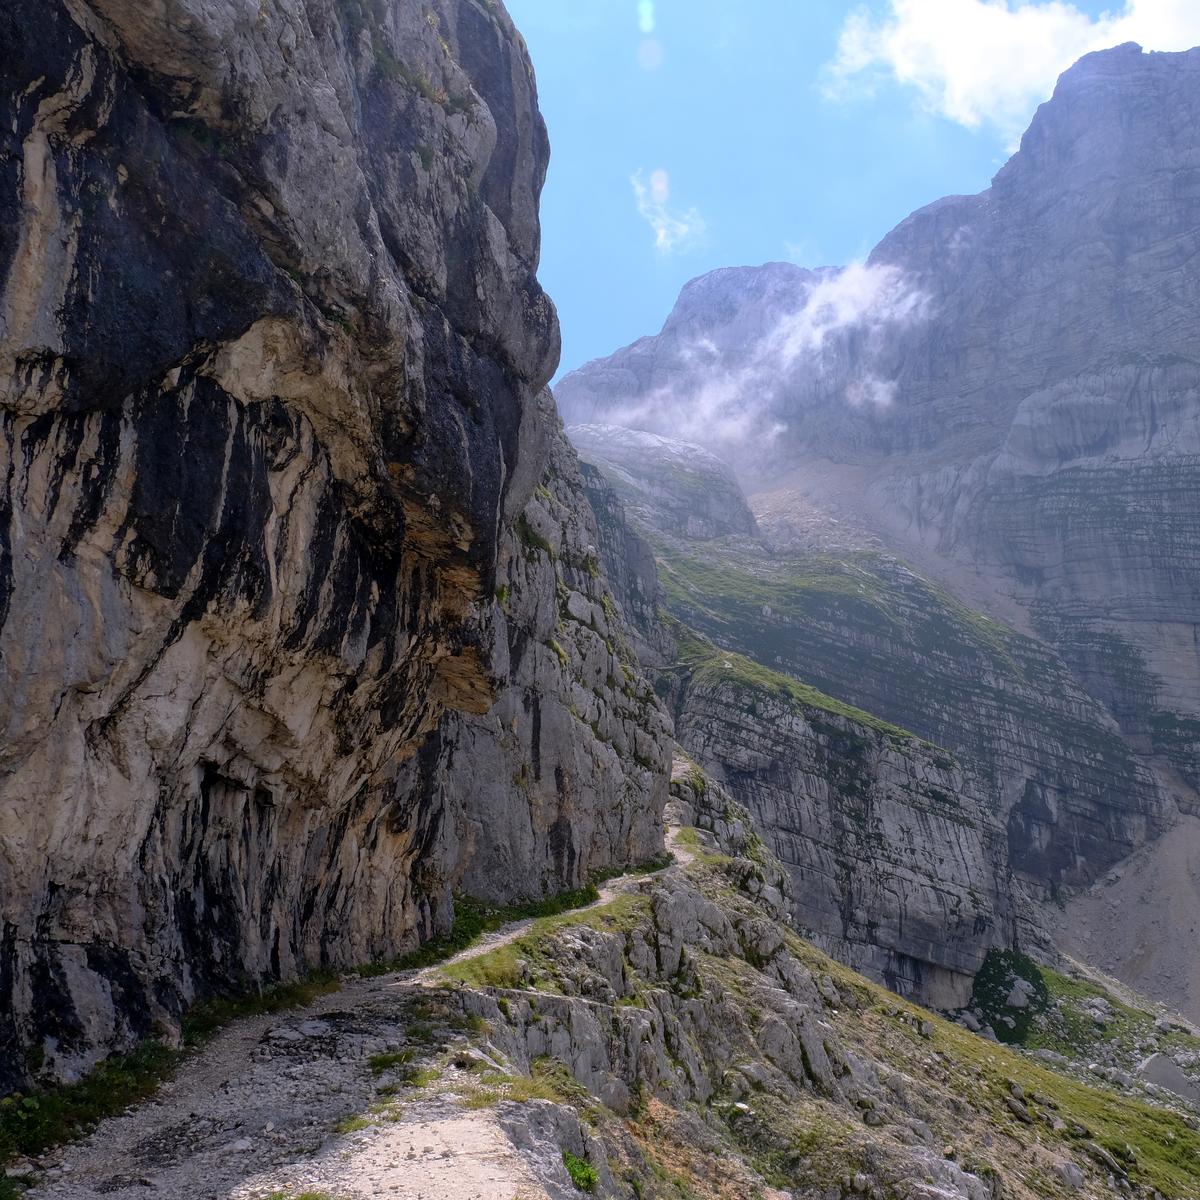 The route hugs the rock face on the way up to Sedlo Dolic, prior to the ascent of Mount Triglav, Slovenia